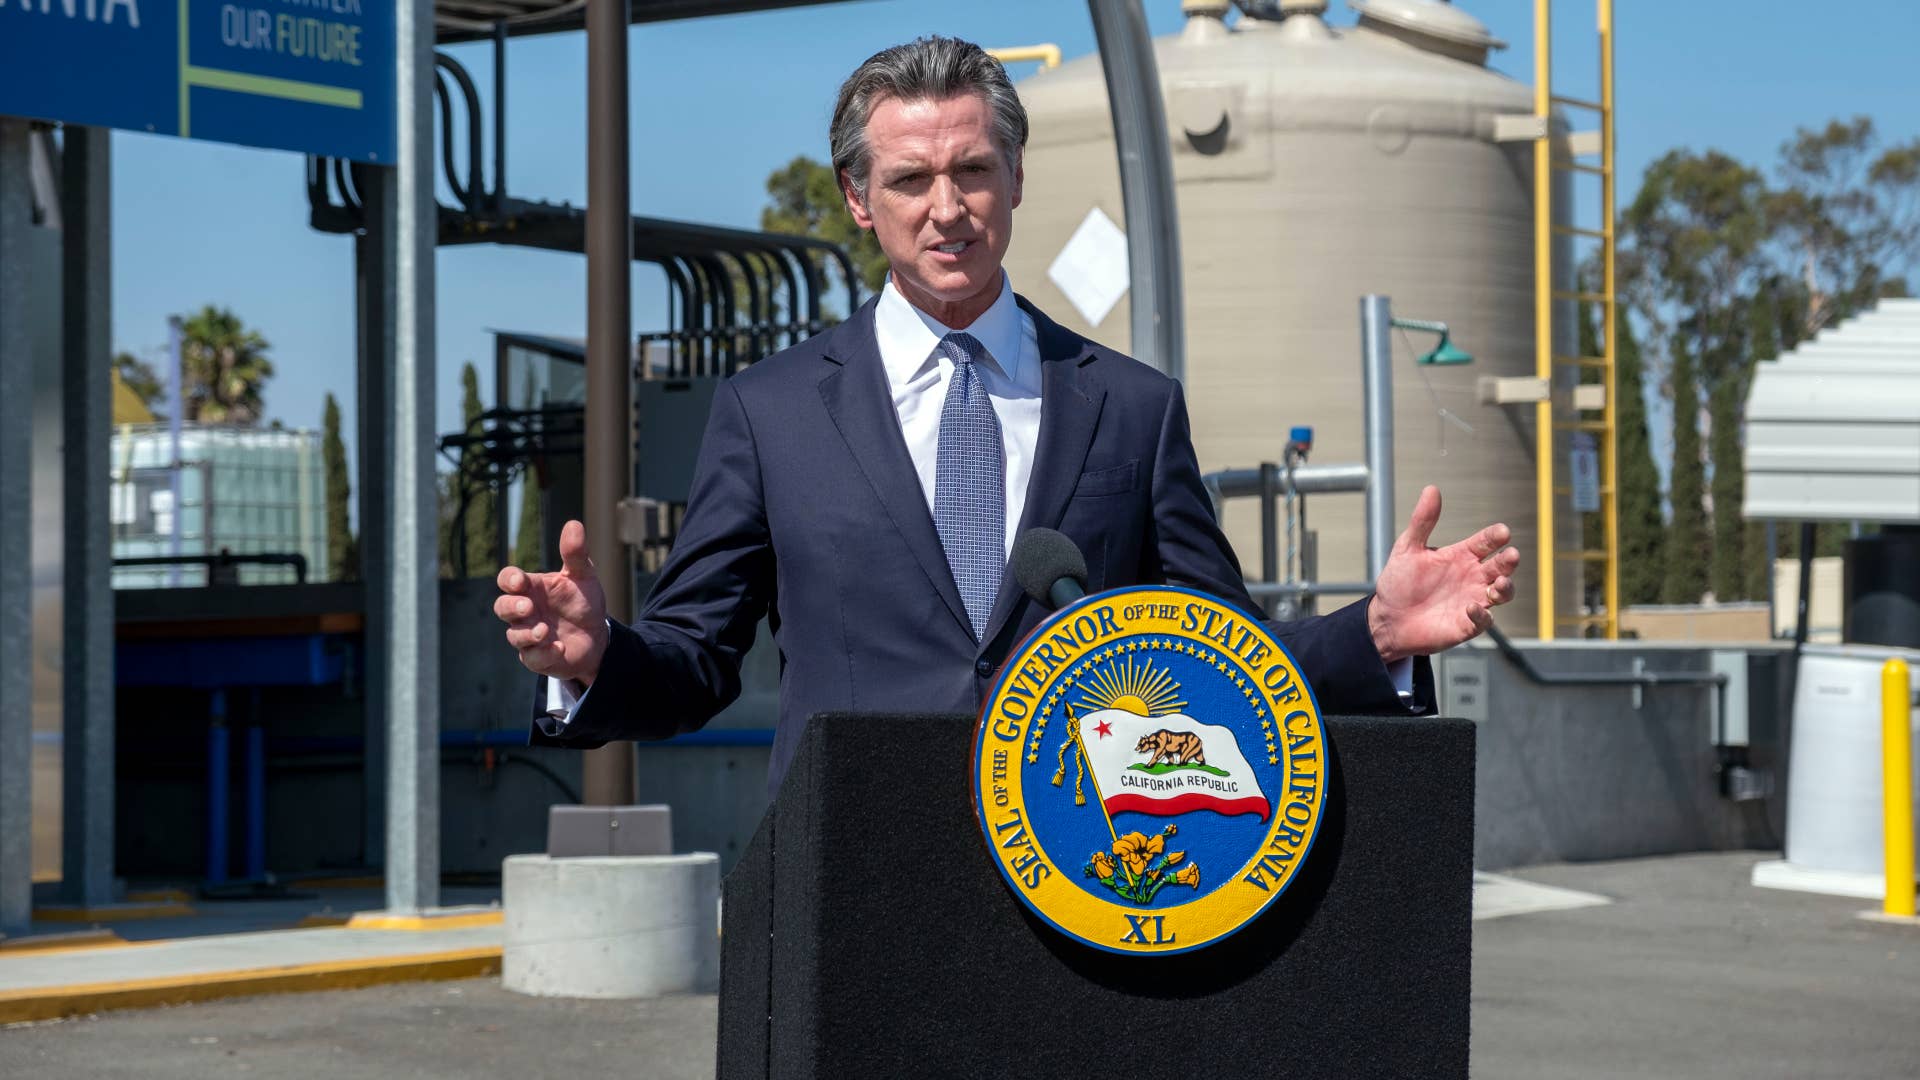 Gavin Newsom is pictured at a podium